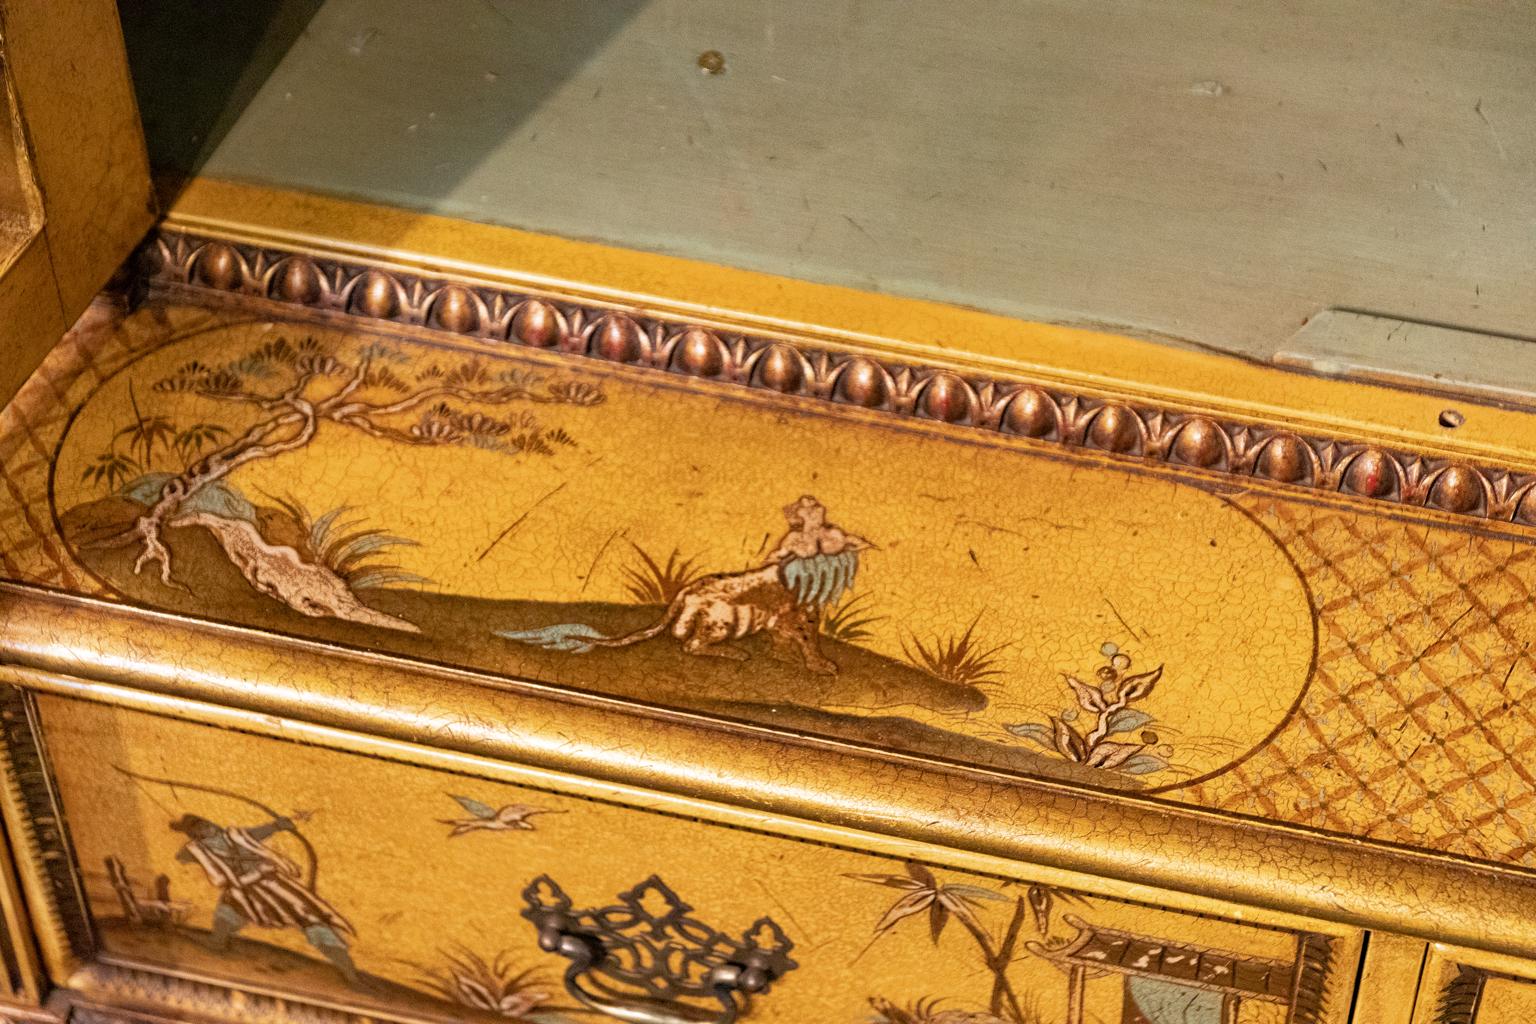 Circa 1890s Georgian Chinoiserie style decorated two door, glass front bookcase with two drawers and five shelves on lion's paw feet. The piece is also gilded and detailed throughout with Chinoiserie decorations such as foliage, flowers, and birds